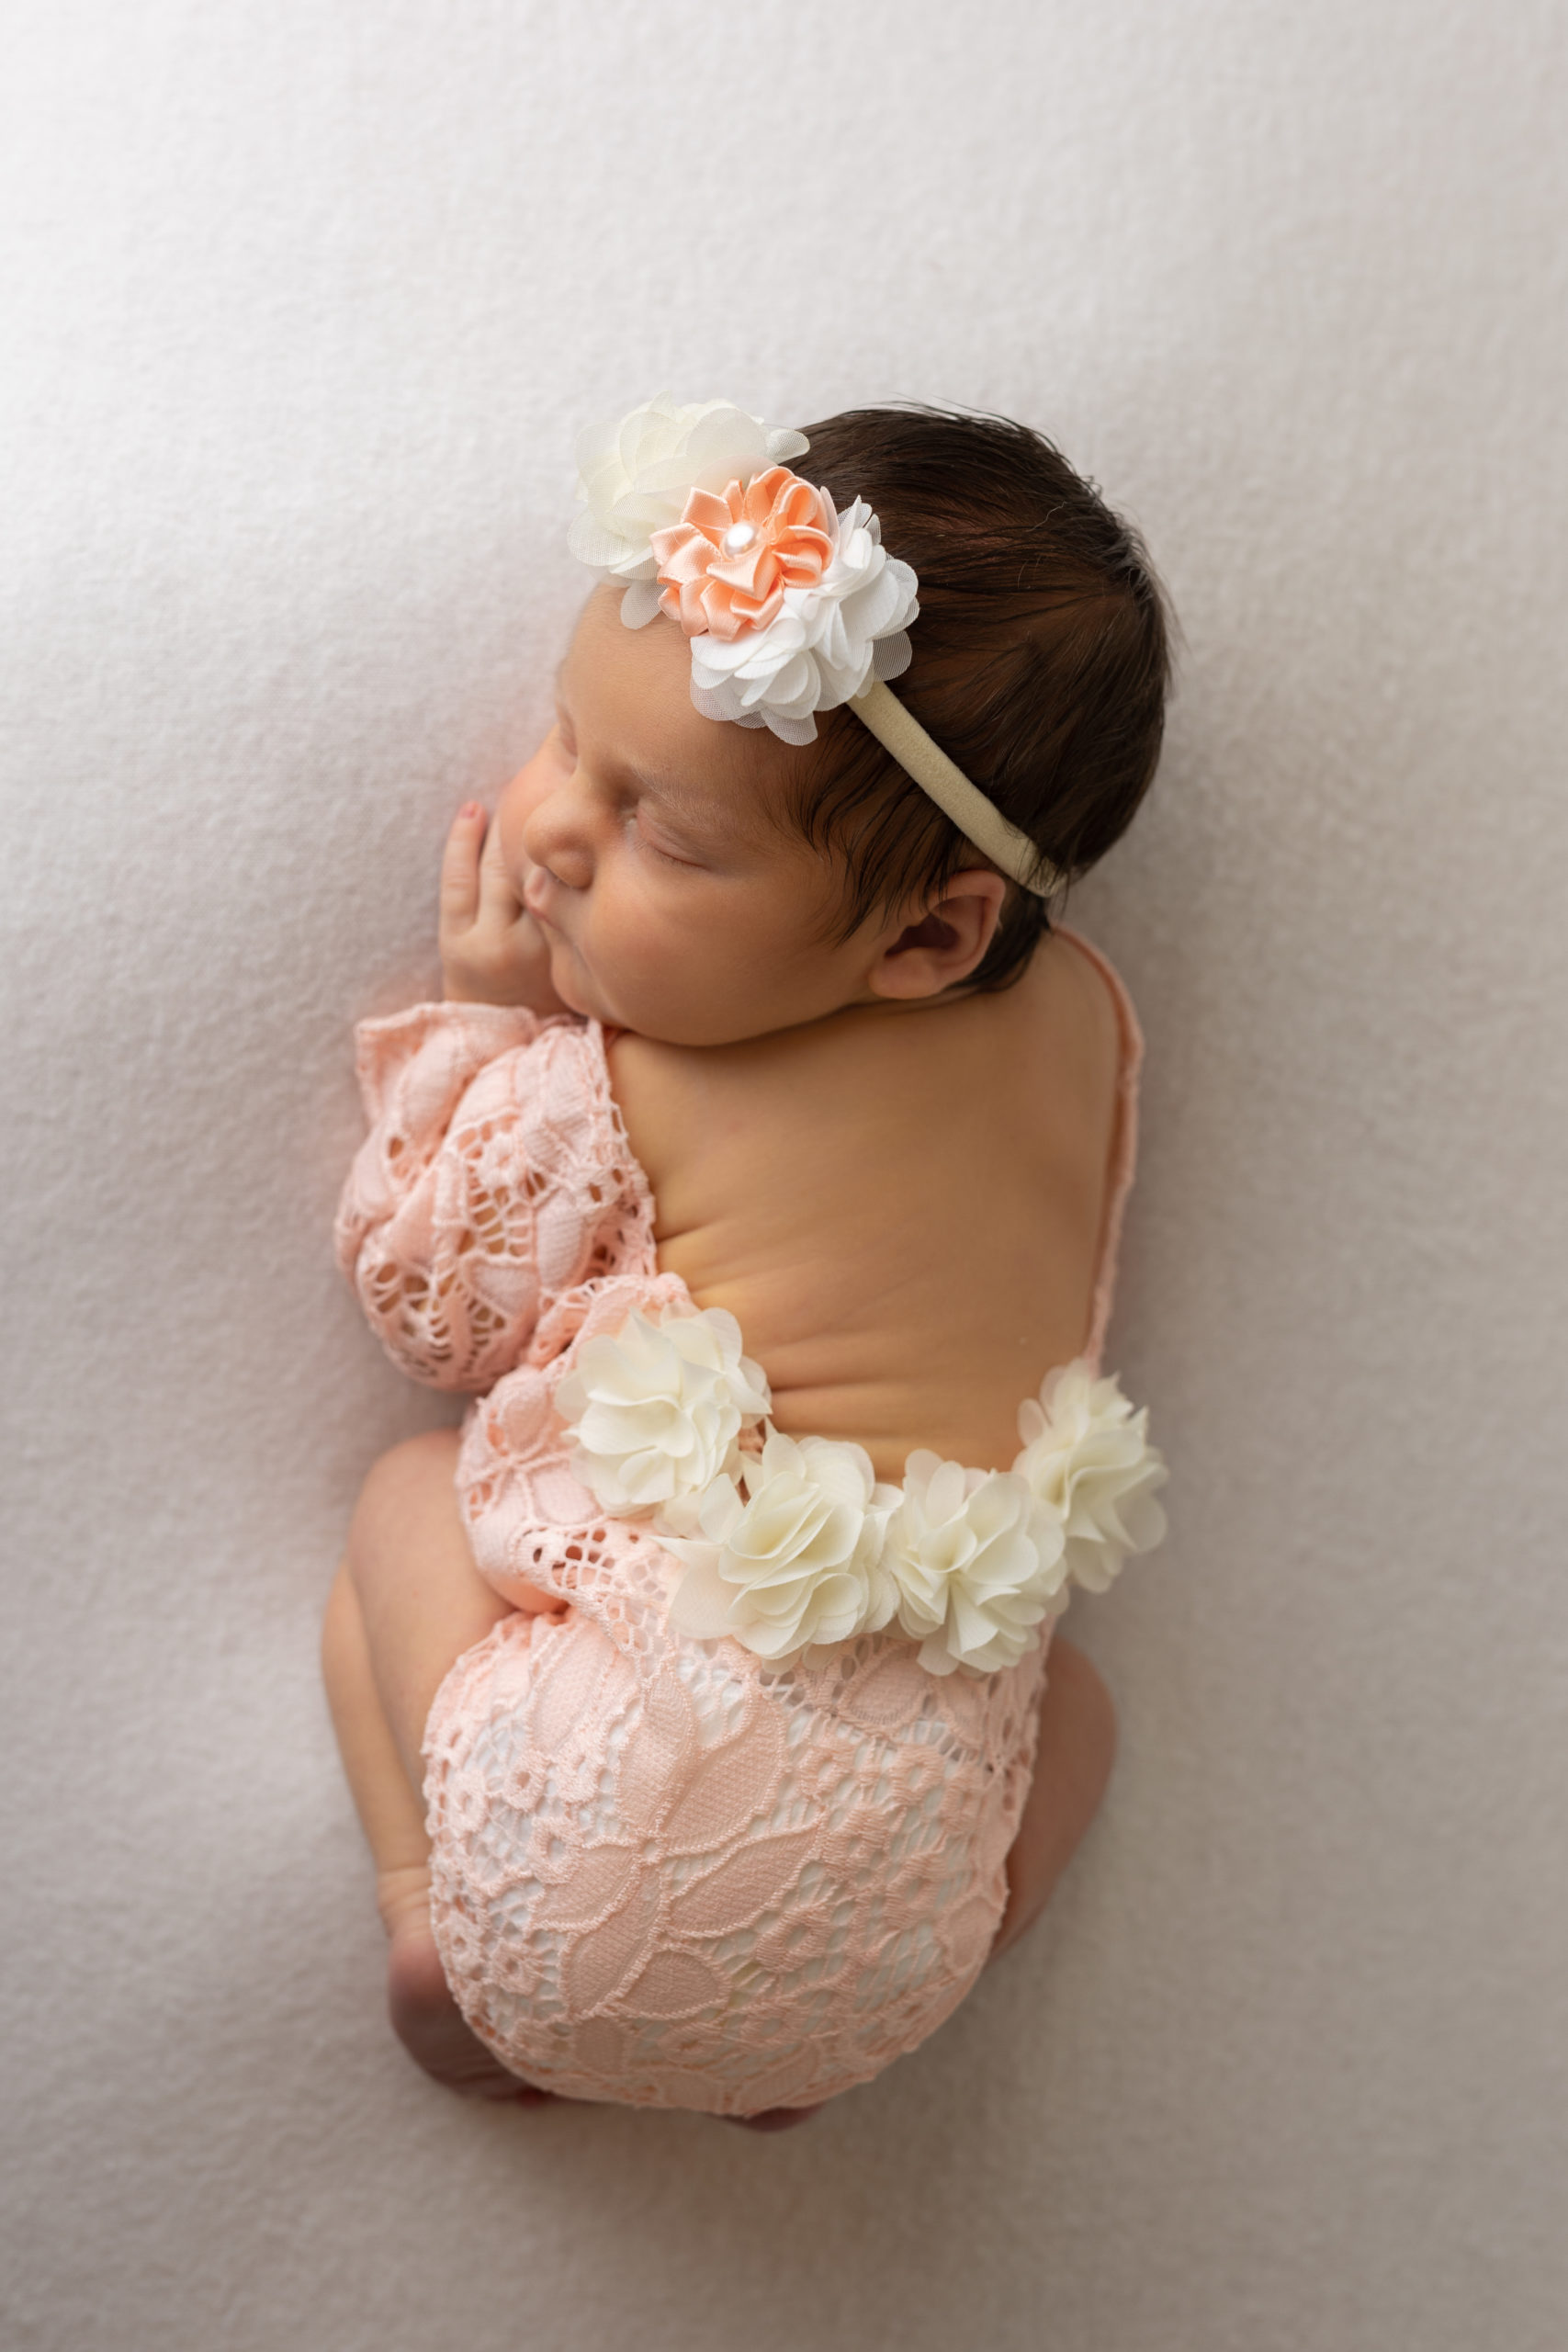 Milwaukee newborn photographer took a photo of a baby girl in a pink lace outfit